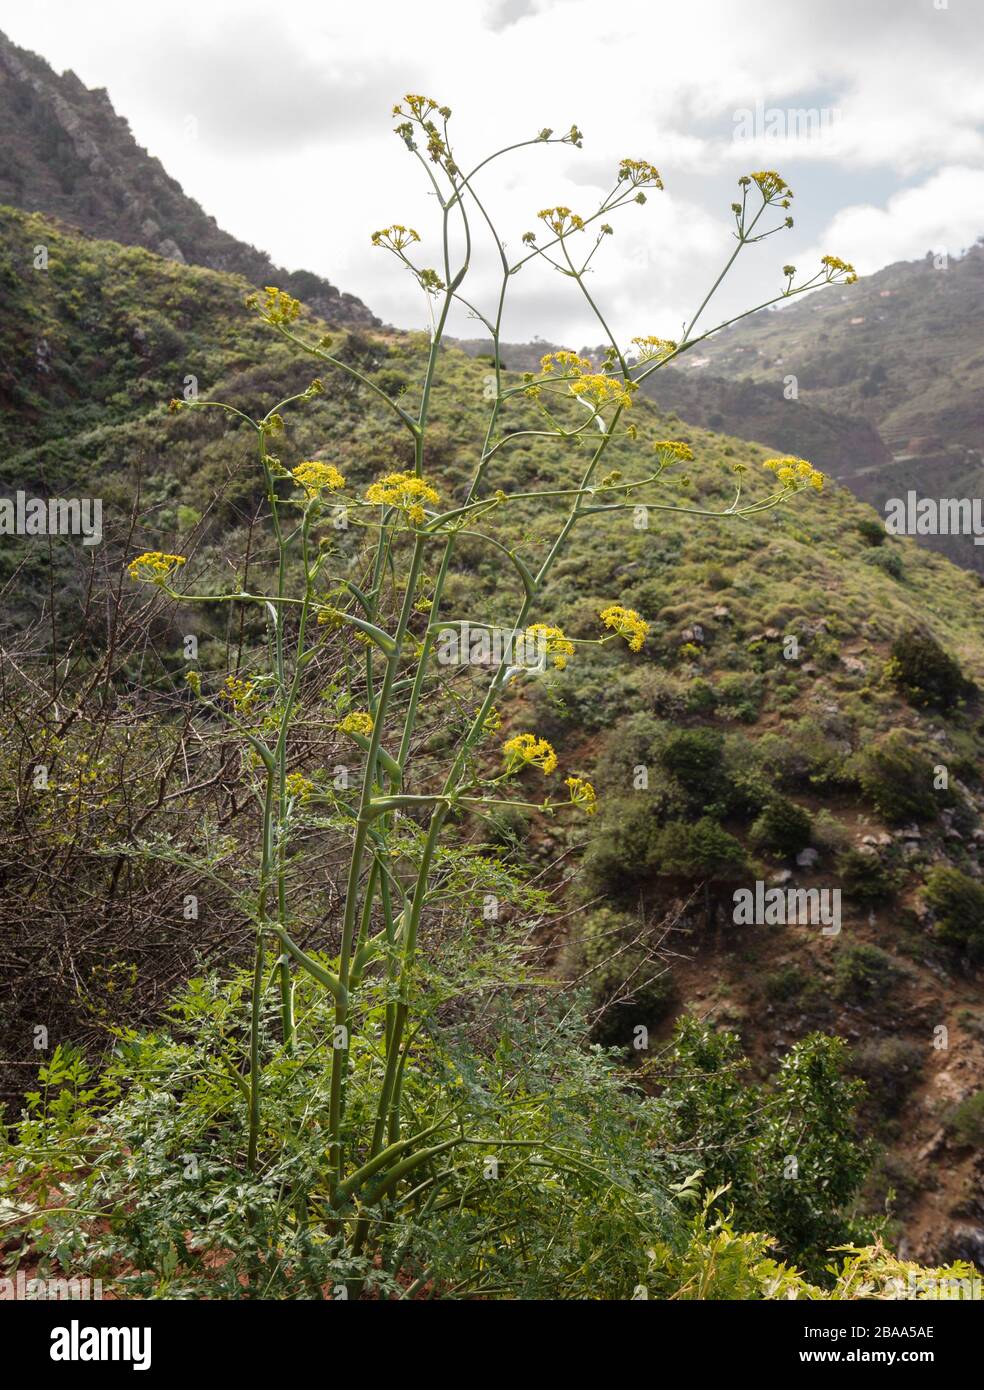 Ferula latipinna, an endemism of the Canary islands Stock Photo